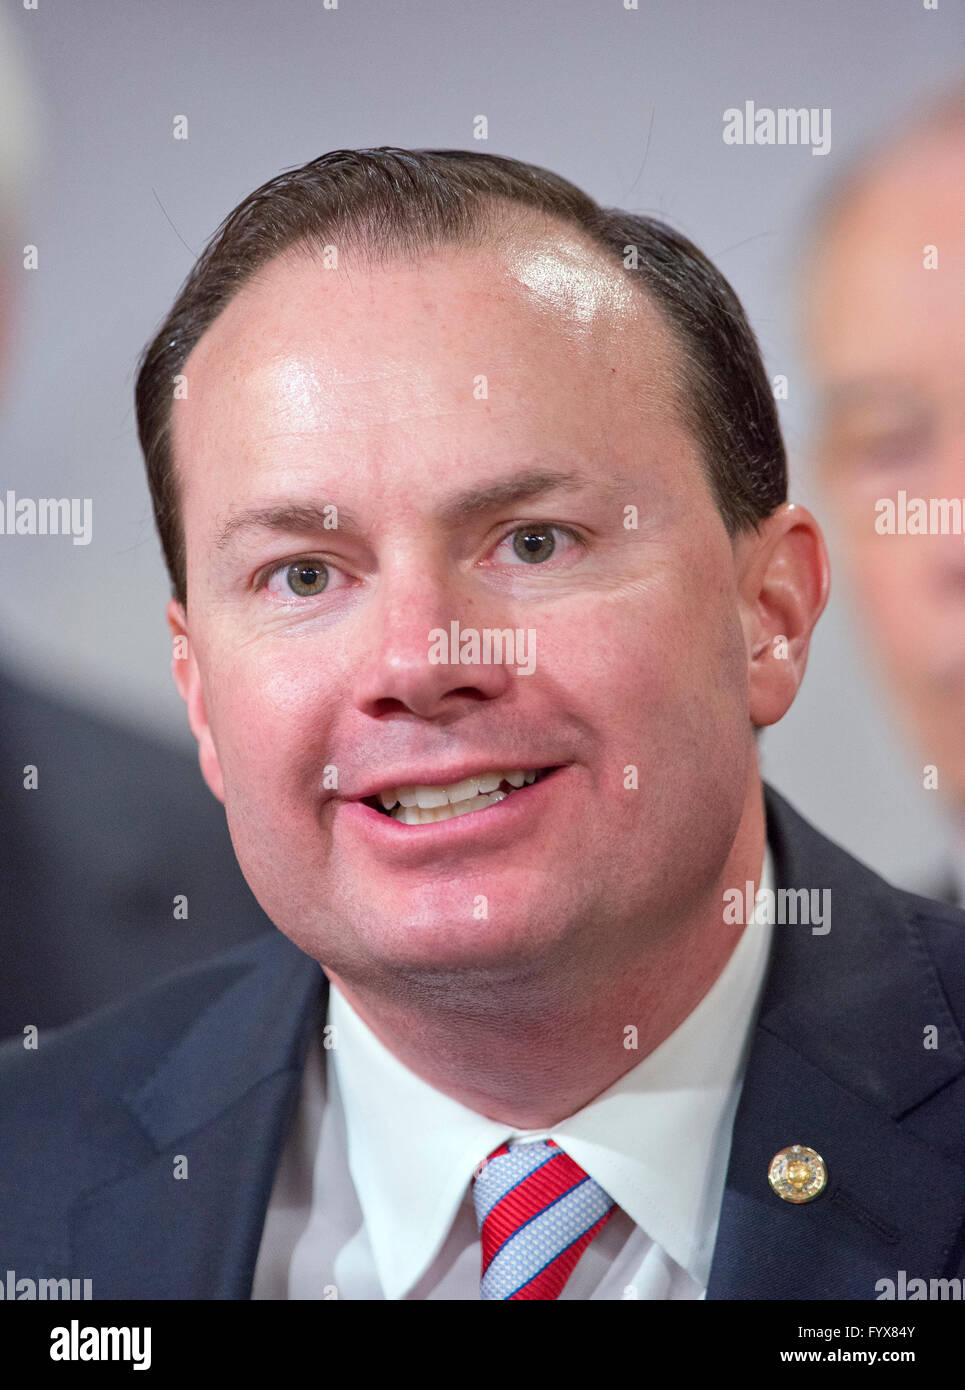 United States Senator Mike Lee (Republican of Utah) makes remarks during a press conference calling on the US Senate Republican leadership to bring to the floor the bipartisan Sentencing Reform and Corrections Act, a bill to reduce some mandatory minimum sentences and apply those changes retroactively to inmates currently serving unfair sentences. Credit: Ron Sachs/CNP - NO WIRE SERVICE - Stock Photo